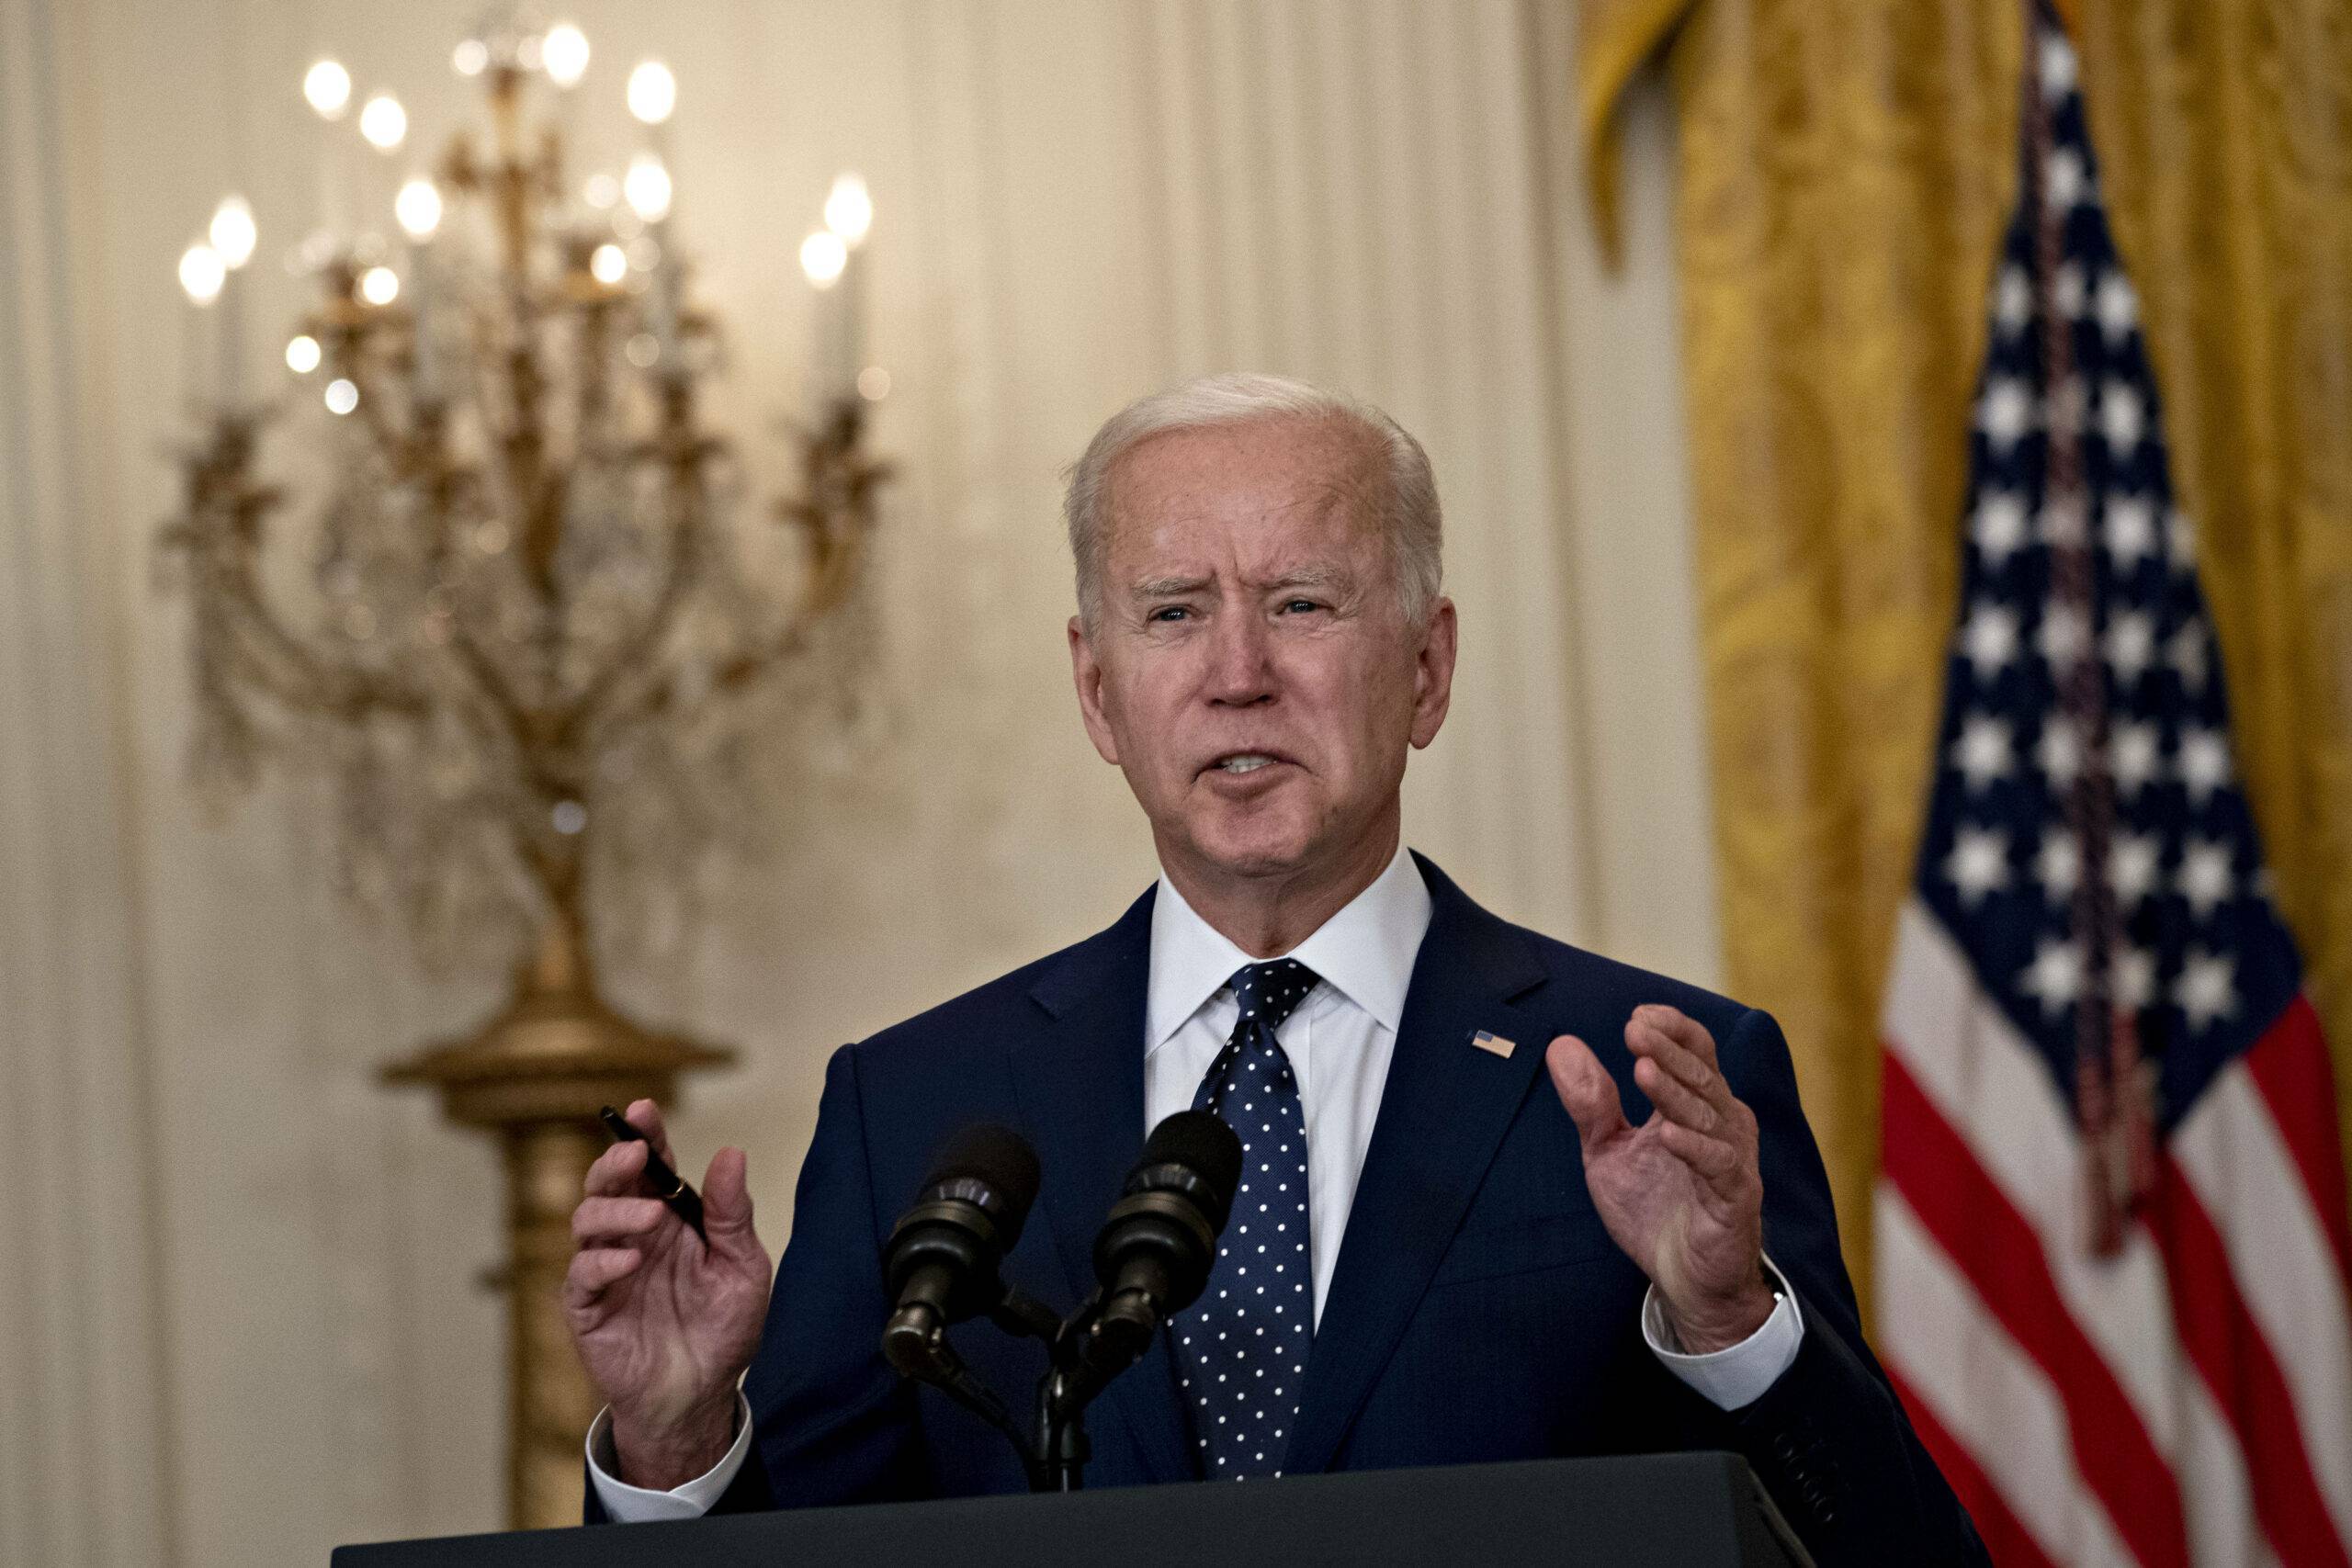 U.S. President Joe Biden speaks in the East Room of the White House in Washington, D.C., U.S., on Thursday, April 15, 2021. The Biden administration imposed a raft of new sanctions on Russia, including long-feared restrictions on buying new sovereign debt, in retaliation for alleged misconduct including the SolarWinds hack and efforts to disrupt the U.S. election.
Credit: Andrew Harrer / Pool via CNP Photo via Newscom/cnpphotos213499/CNP/NEWSCOM/SIPA/2104152345